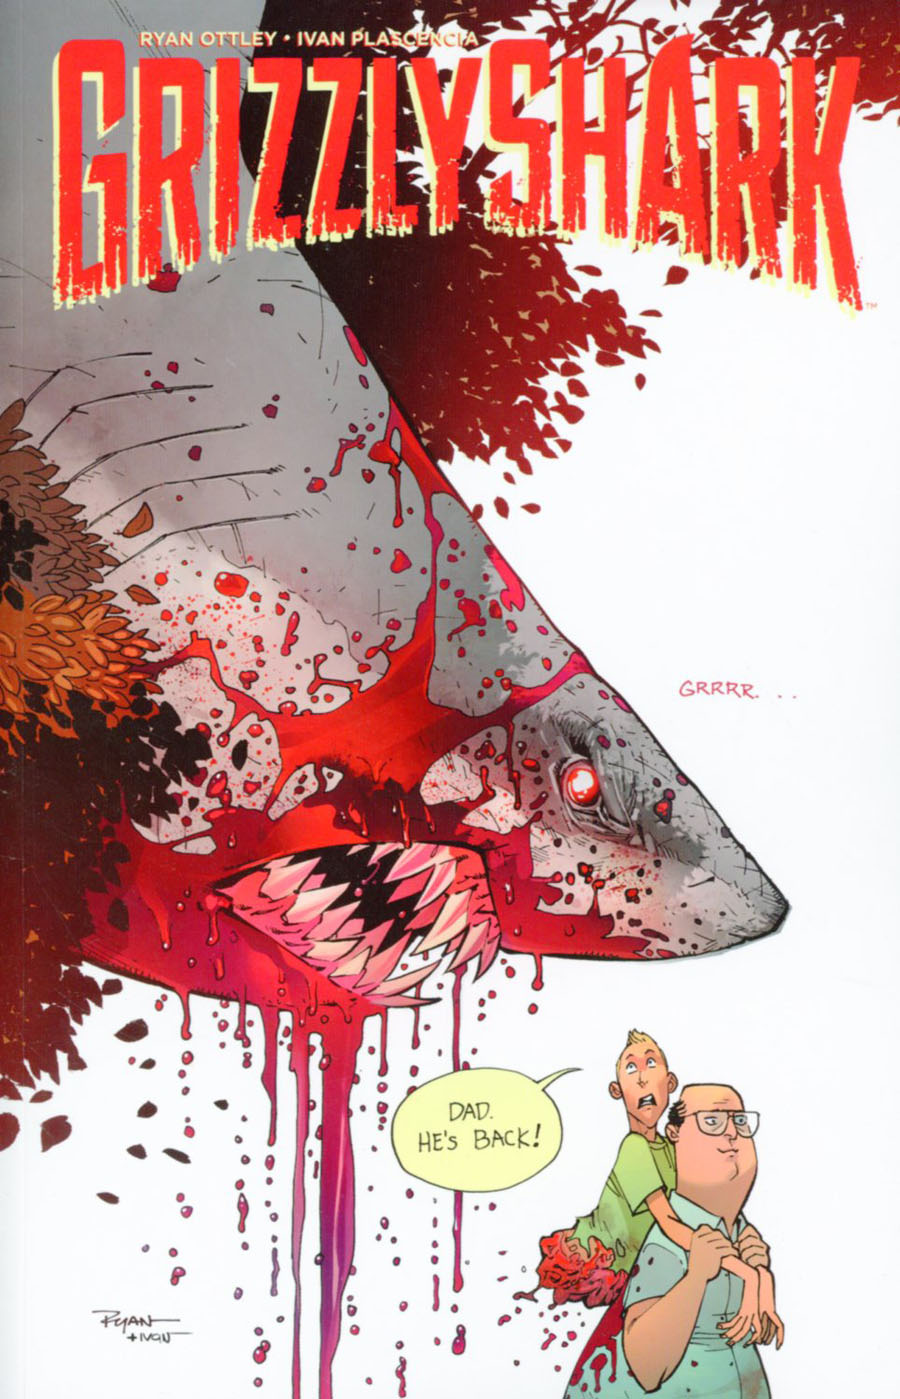 Grizzly Shark Vol 1 TP